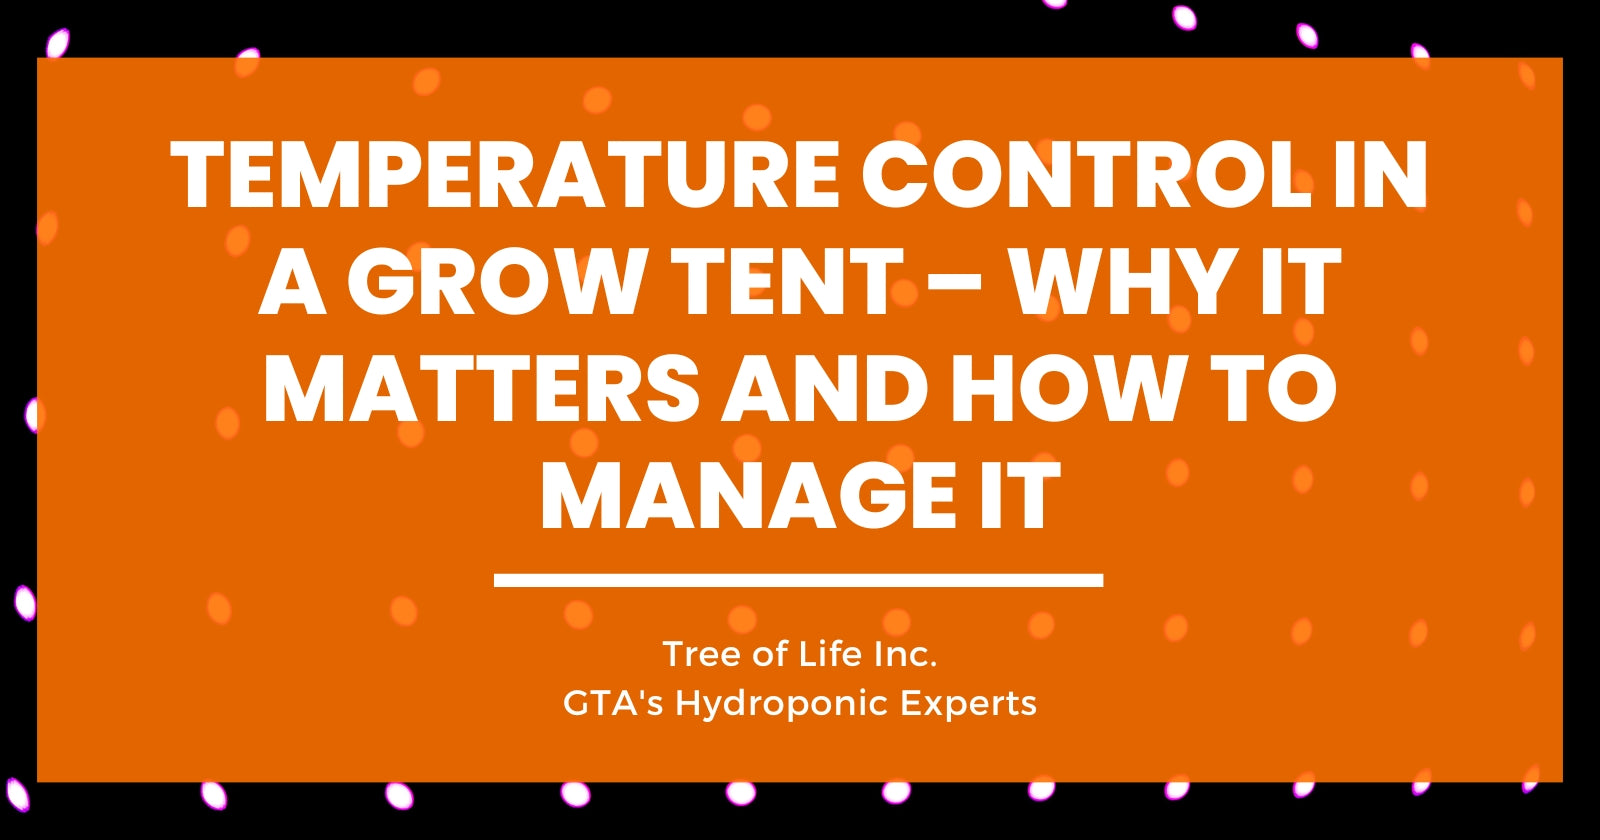 Temperature Control in a Grow Tent – Why it Matters and How to Manage It